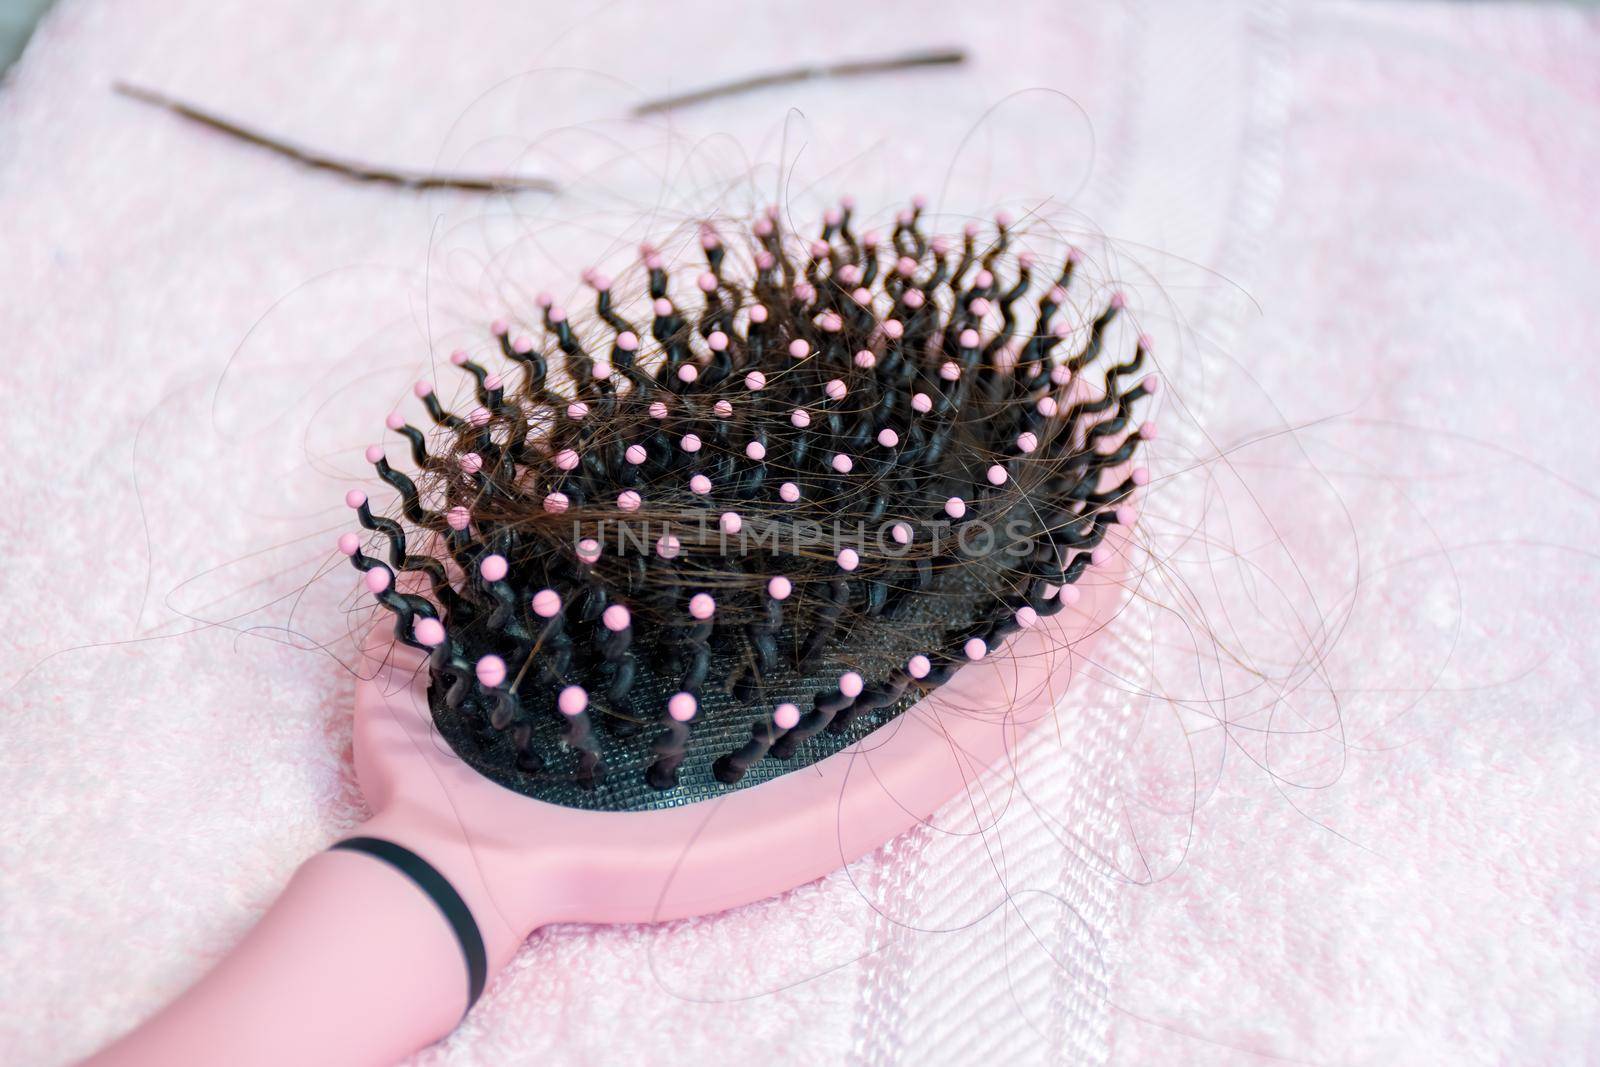 Hair loss concept. Hairbrush with brown fallen hairs on a pink towel.